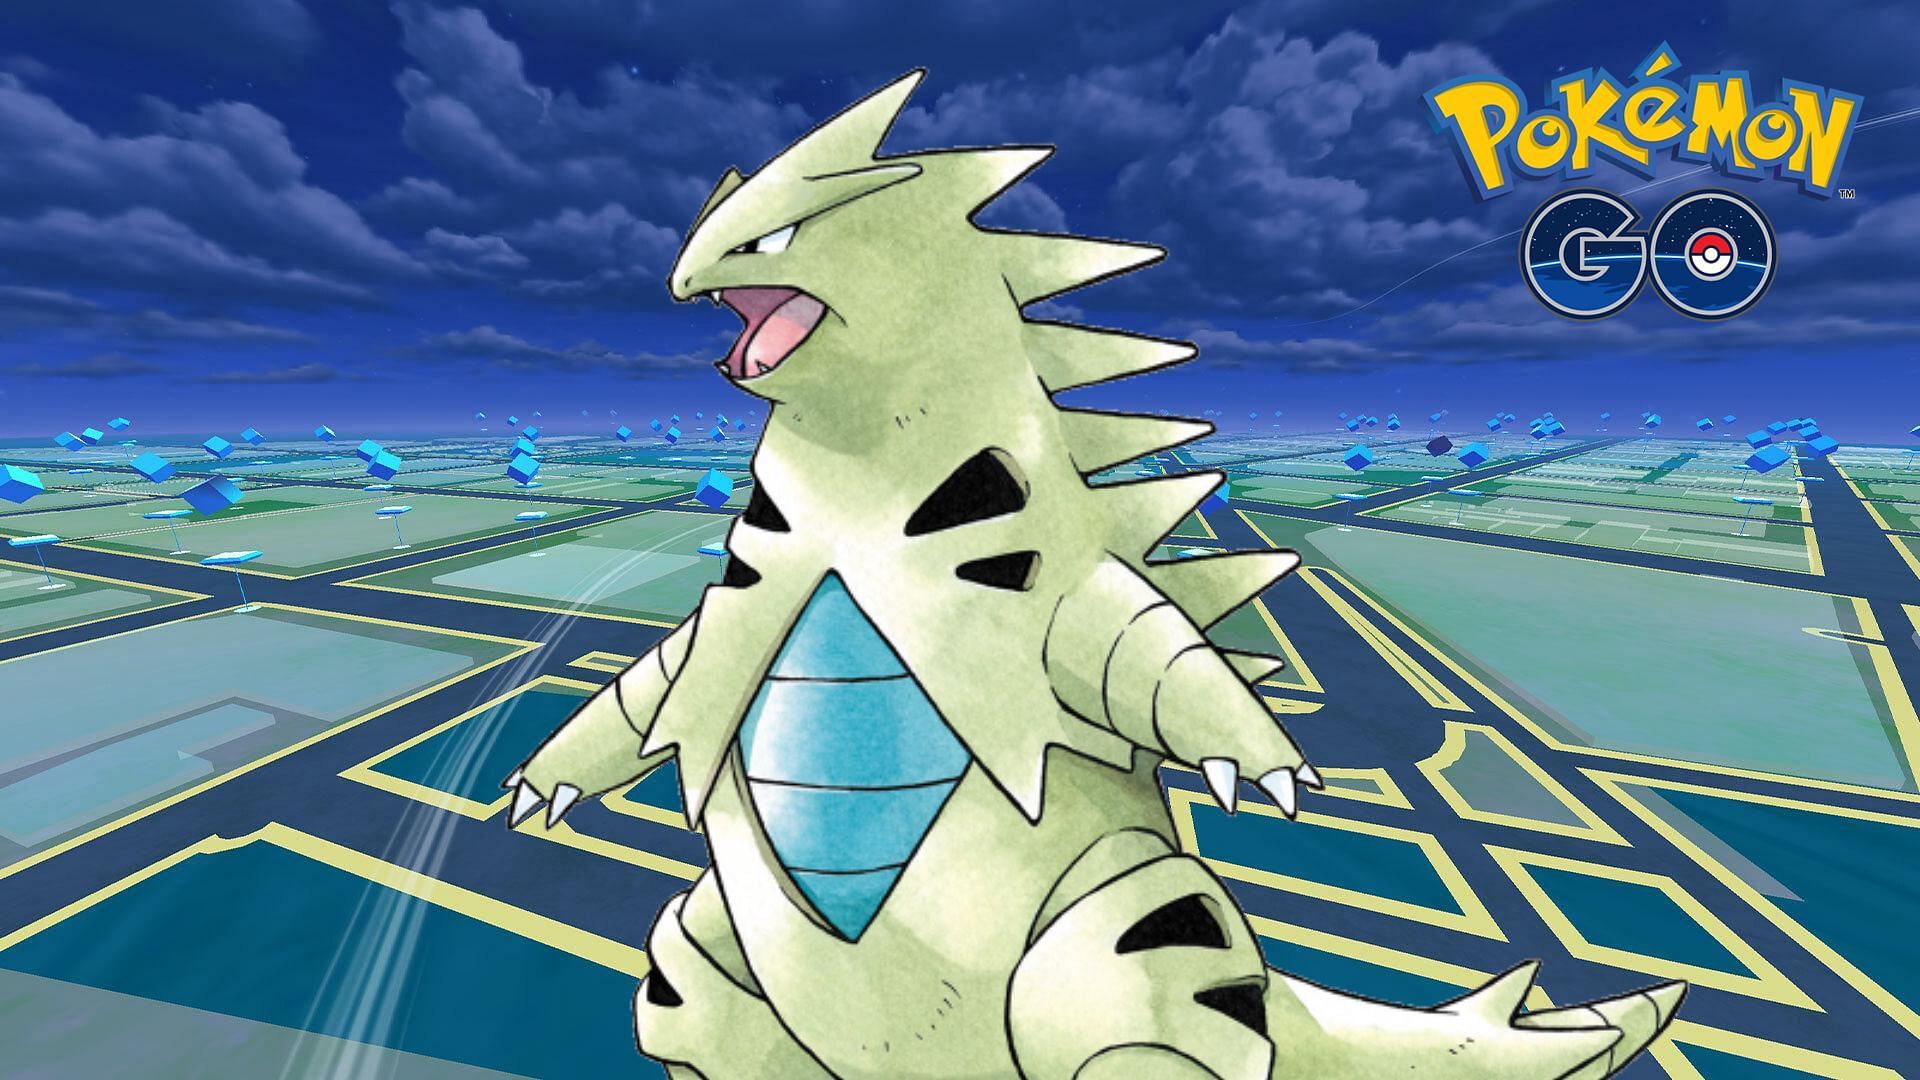 Tyranitar made its debut in Pokemon GO alongside many other creatures from the Generation II games.